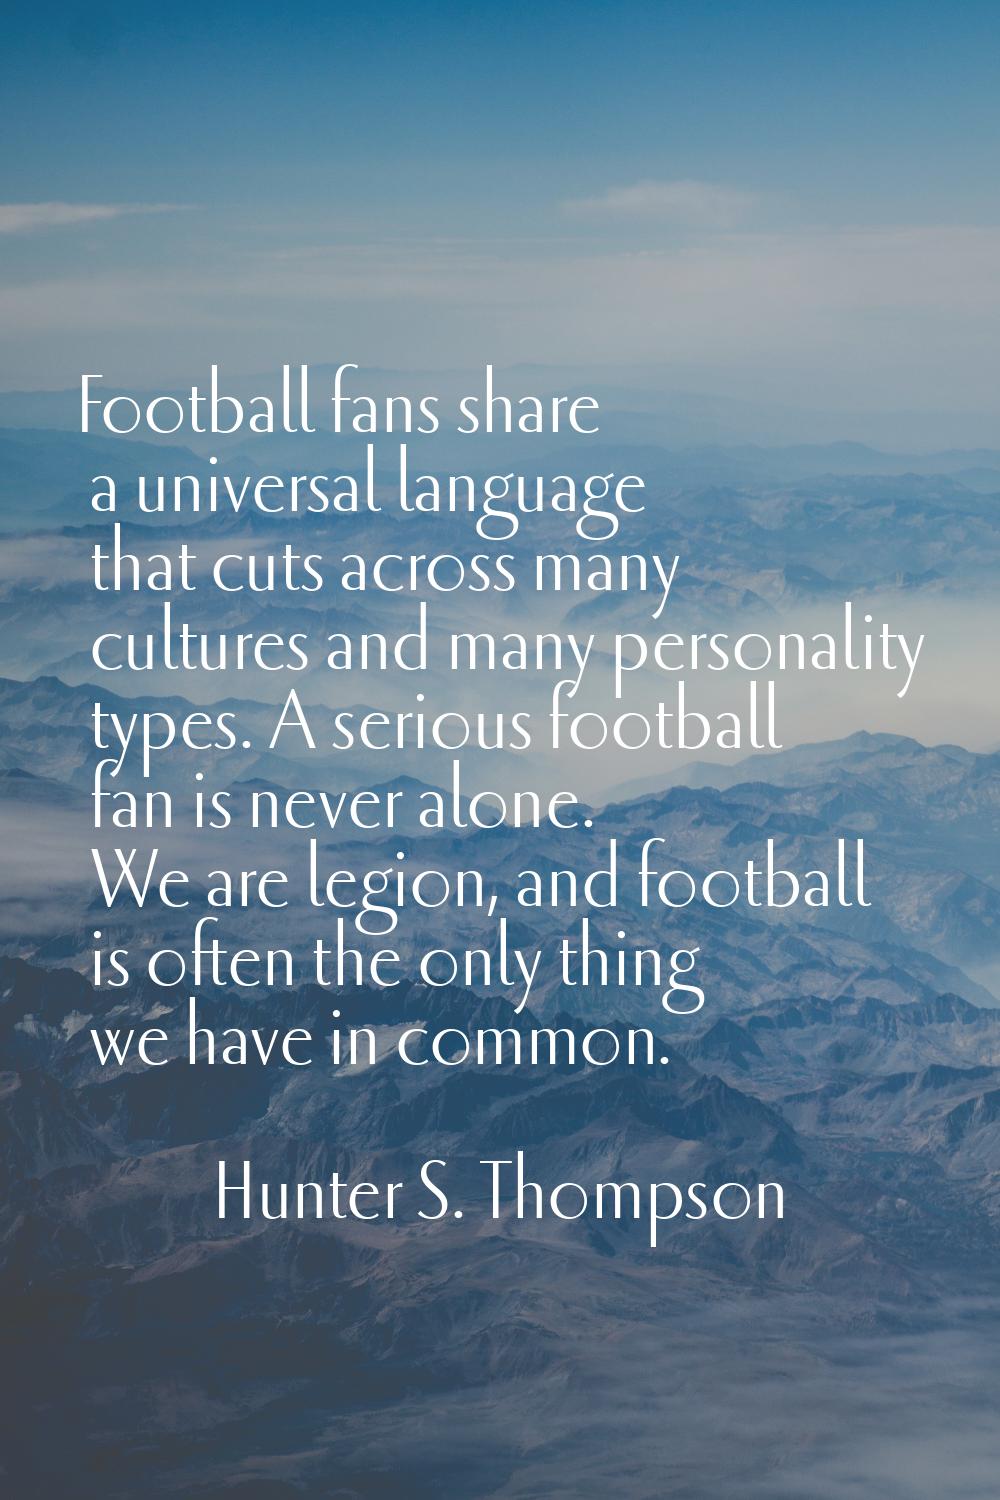 Football fans share a universal language that cuts across many cultures and many personality types.